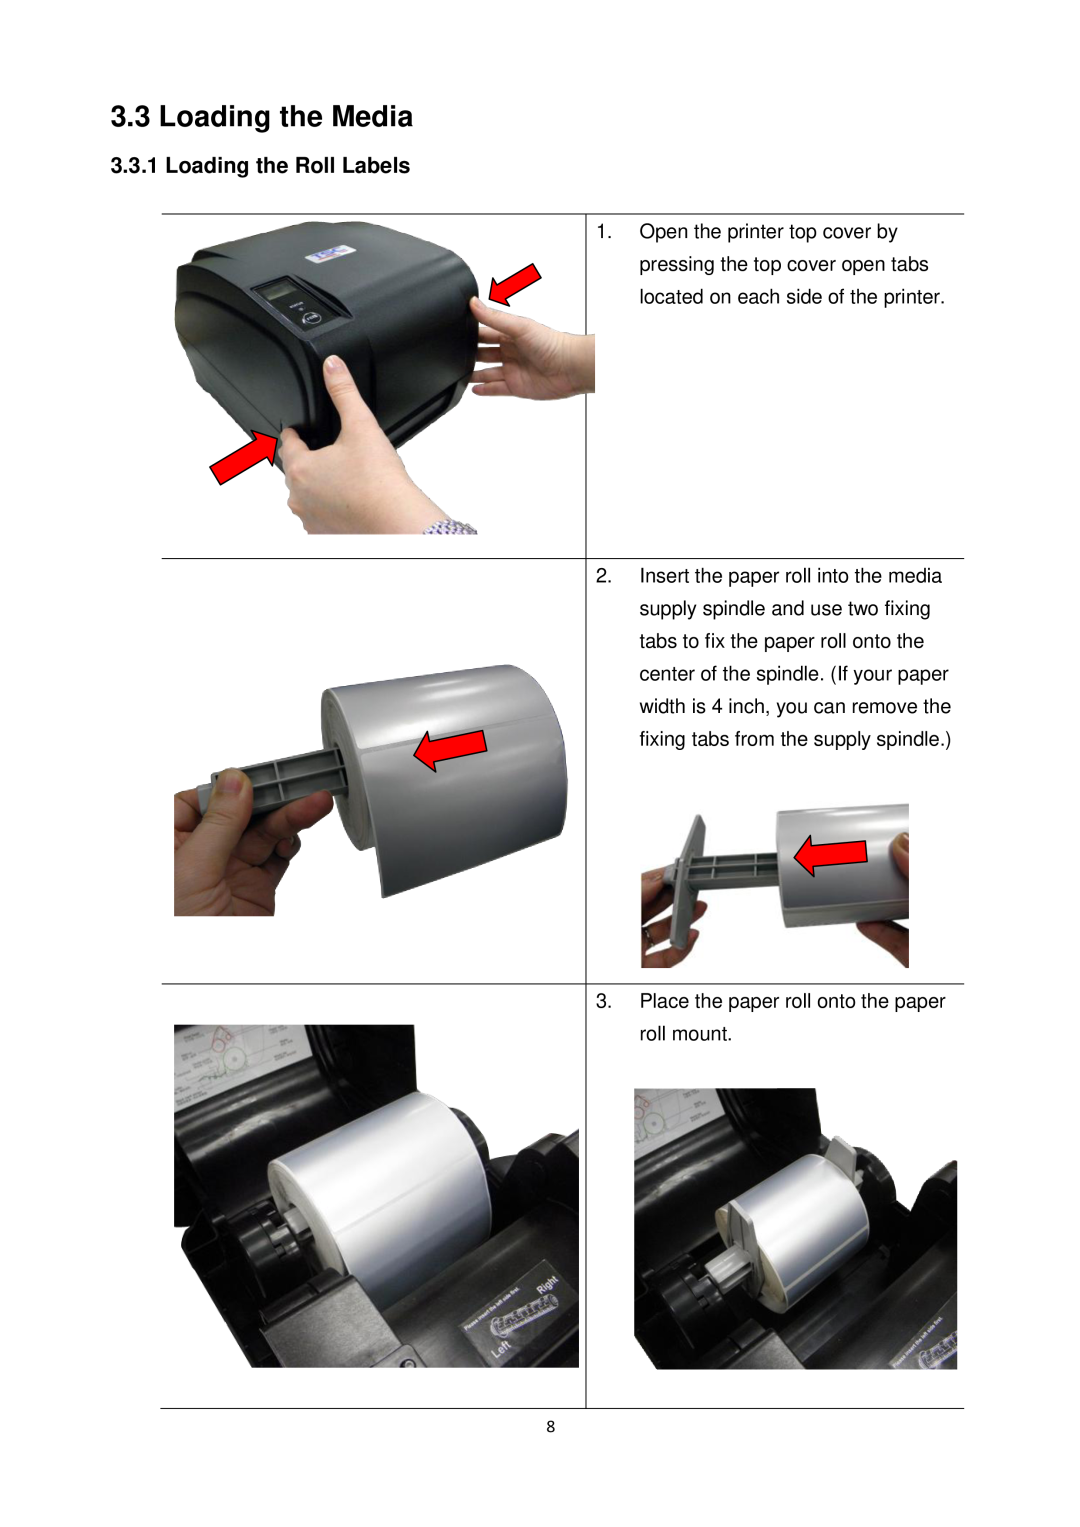 The Speaker Company ta200 manual Loading the Media, Loading the Roll Labels 